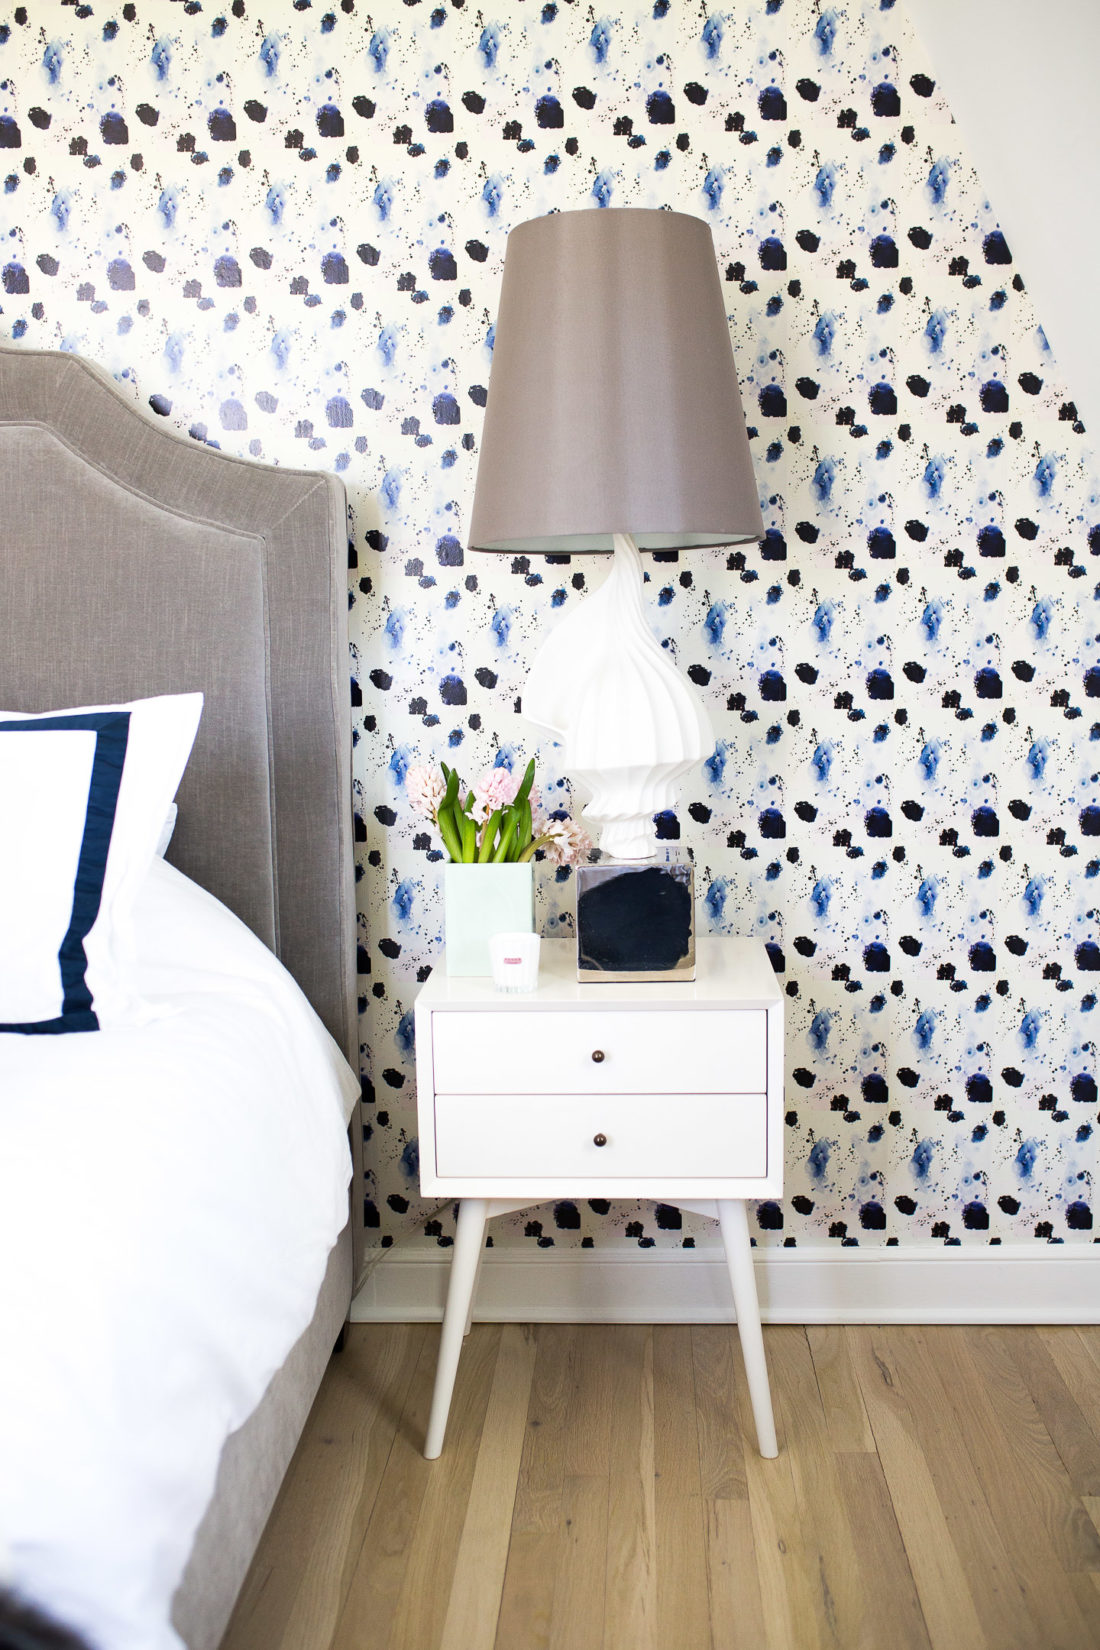 Eva Amurri Martino shows off her guest room revamp, featuring crisp navy and white sheets, midcentury modern bedside tables, a jonathan adler lamp, and kerri rosenthal wallpaper.